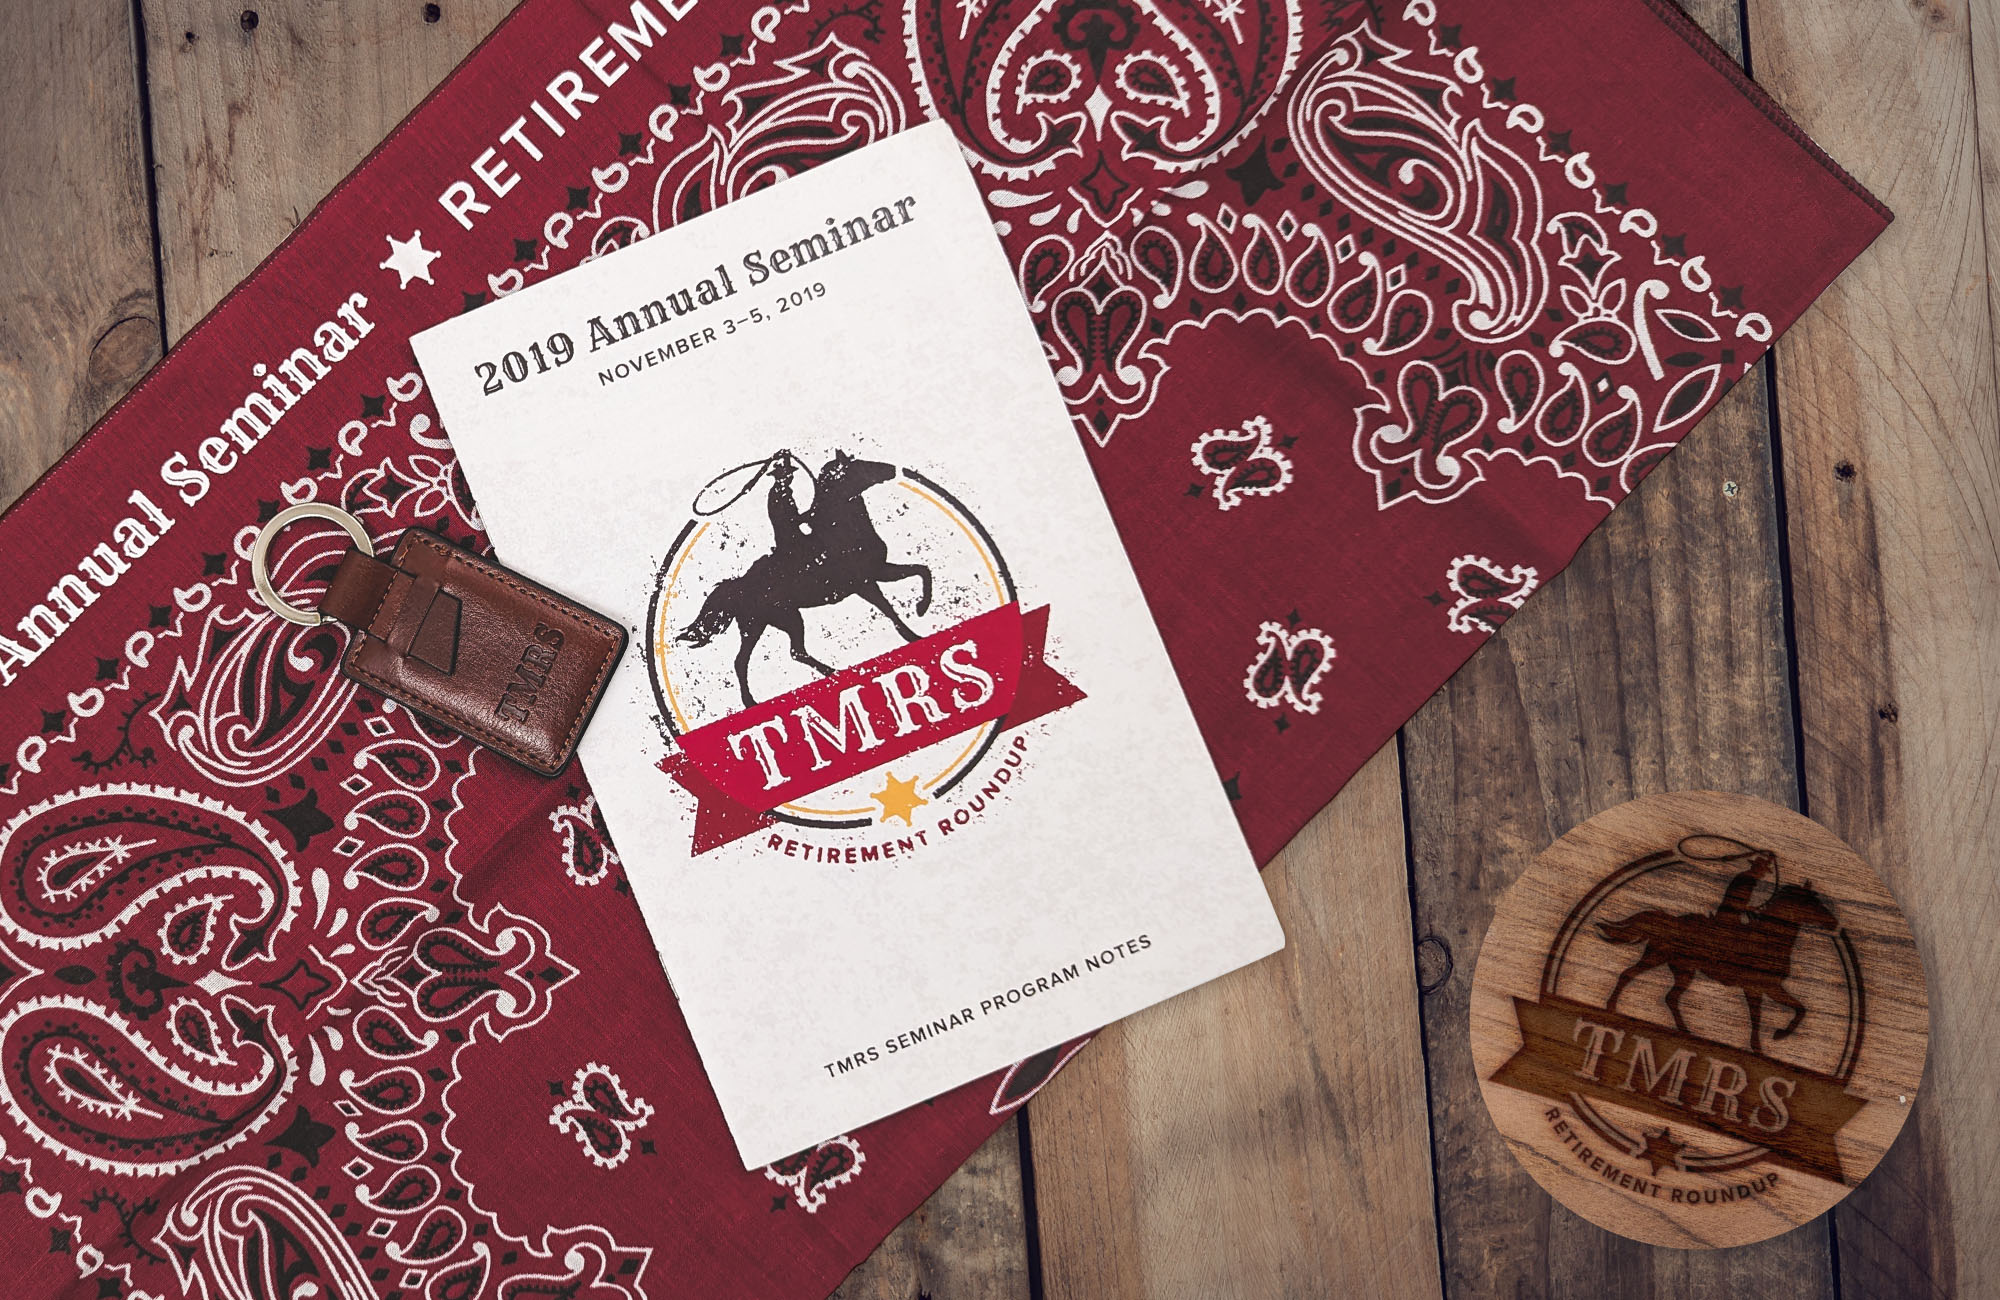 An event program for the 2019 TMRS Annual Seminar next to a leather keychain on top of a red bandana. The logo, which looks like a cowboy with a lasso, appears to be burned into  a wooden coaster in the bottom right of the photo. class=